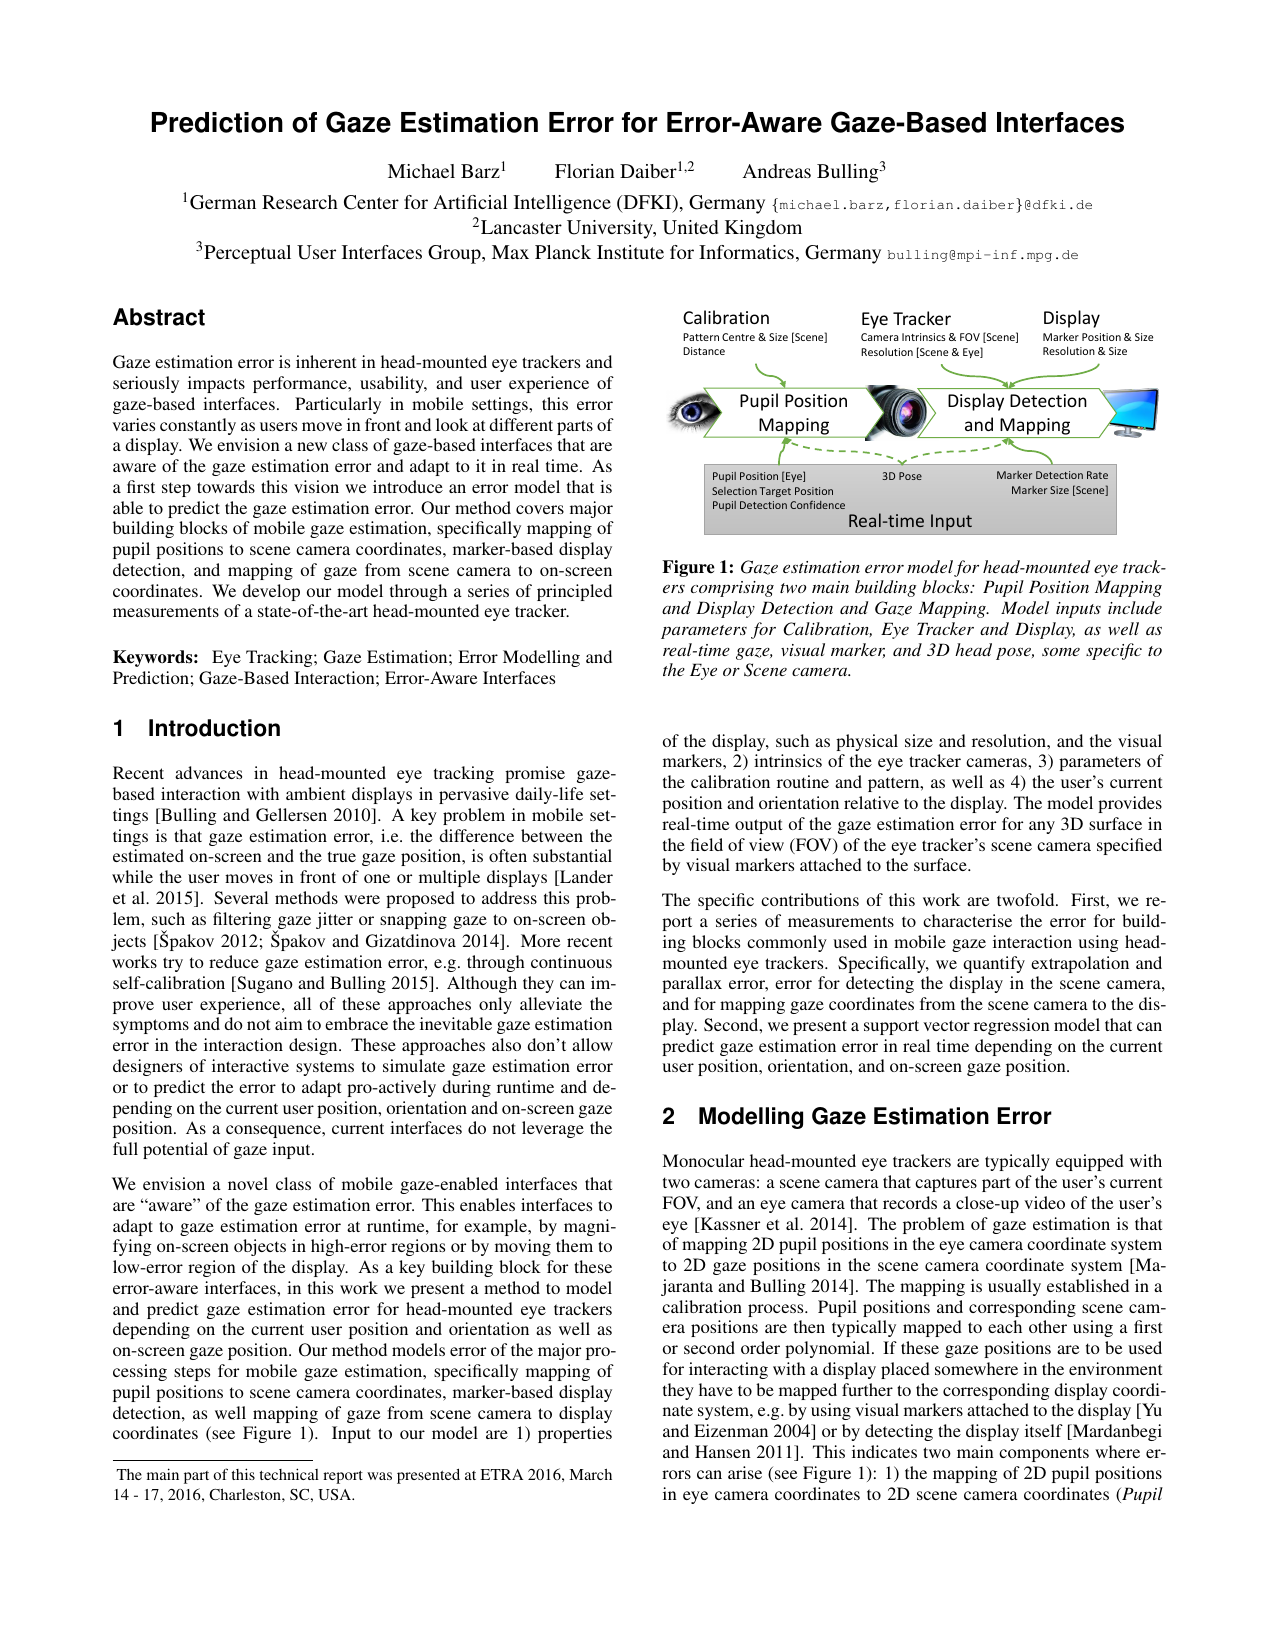 Computational Modelling and Prediction of Gaze Estimation Error for Head-mounted Eye Trackers